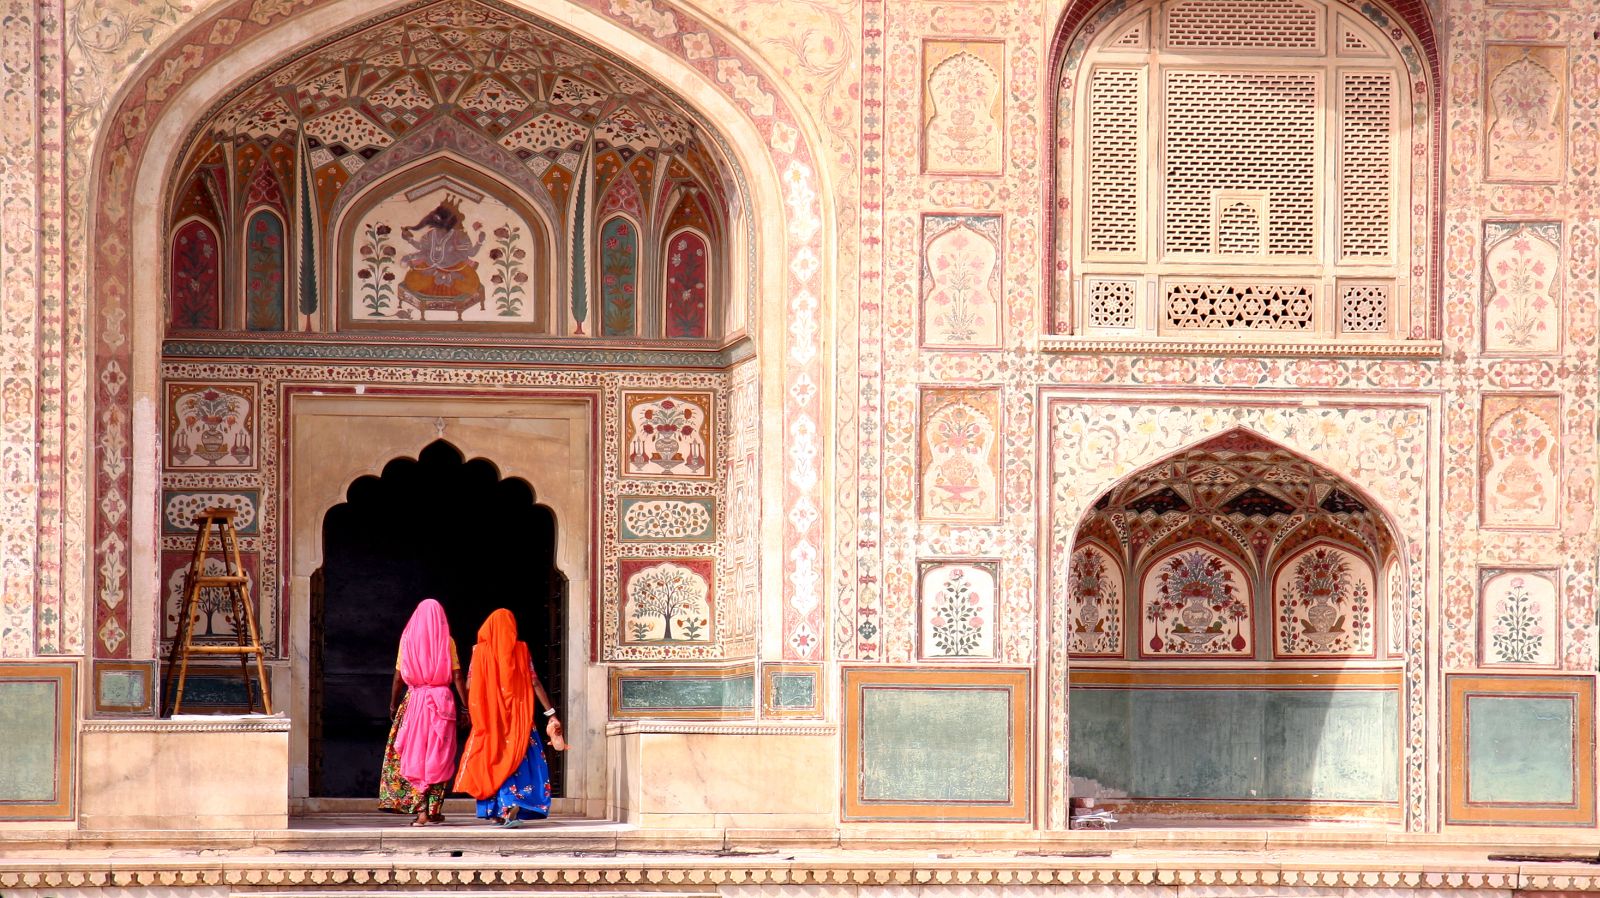 Ladies in traditional dress entering the Amber Fort in Jaipur